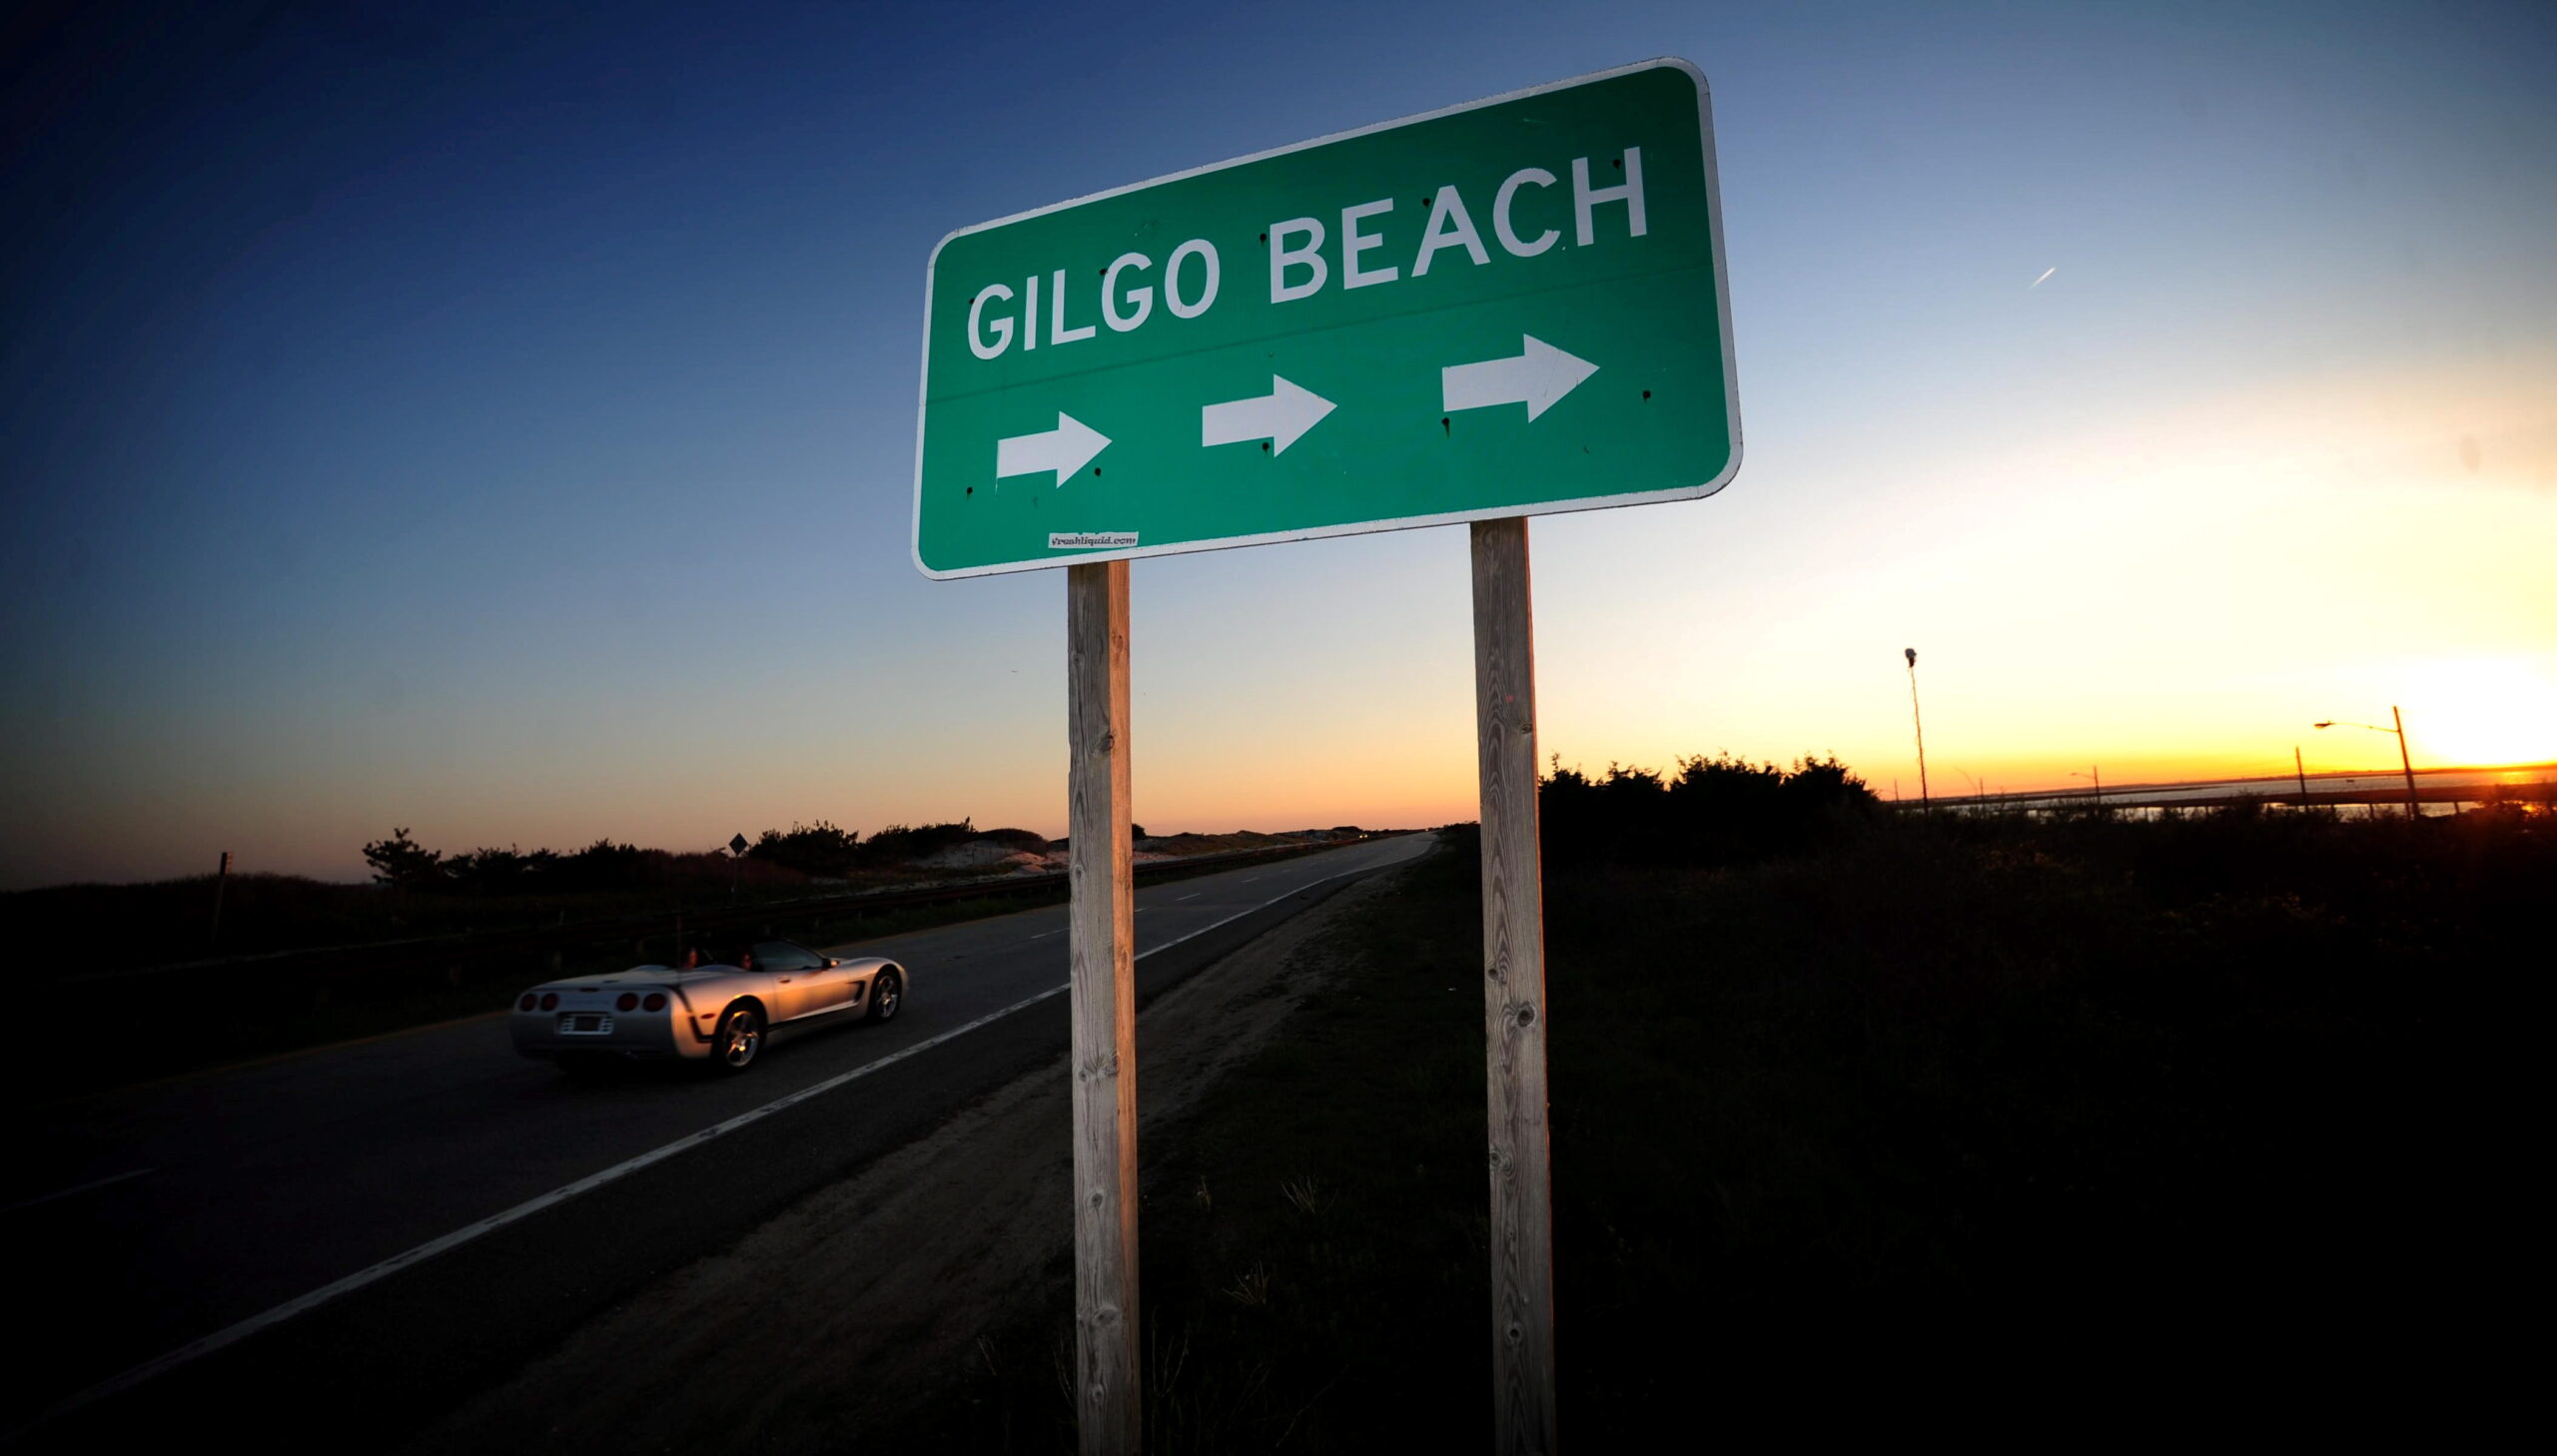 District Attorney reveals Gilgo Beach Serial Killer suspect had a ‘planning document’ for murders